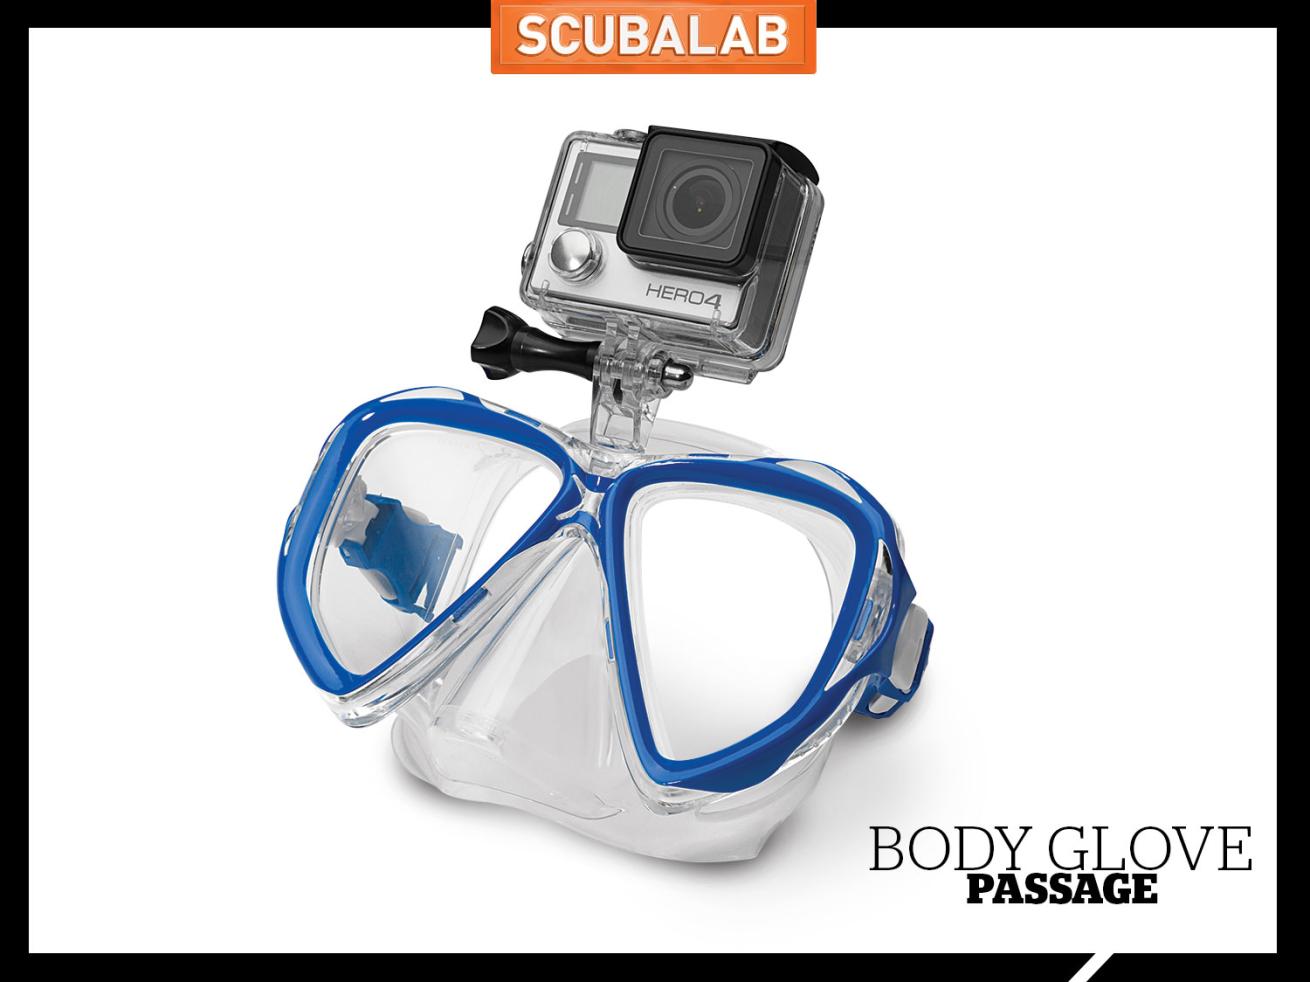 Specialty Dive Masks: Colored Lenses, Magnifying & GoPro Mount Options